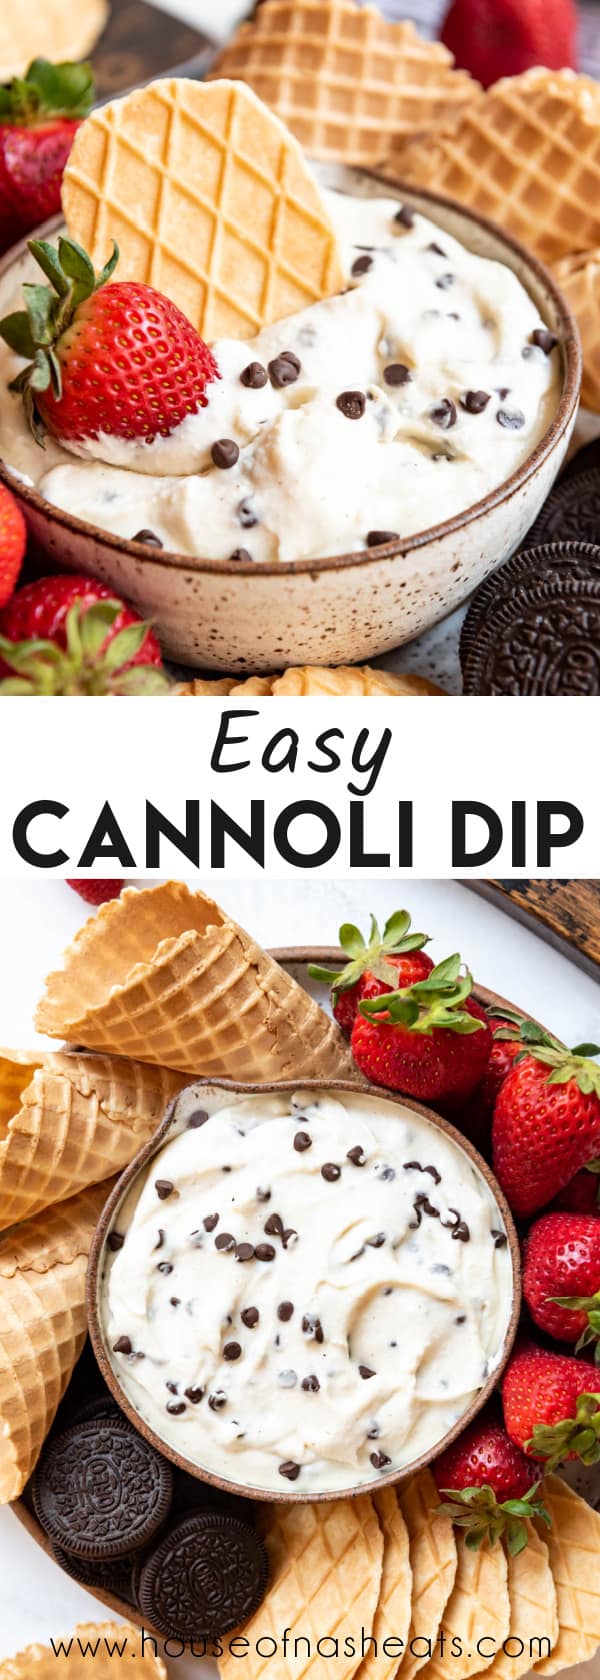 A collage of images of cannoli dip with text overlay.